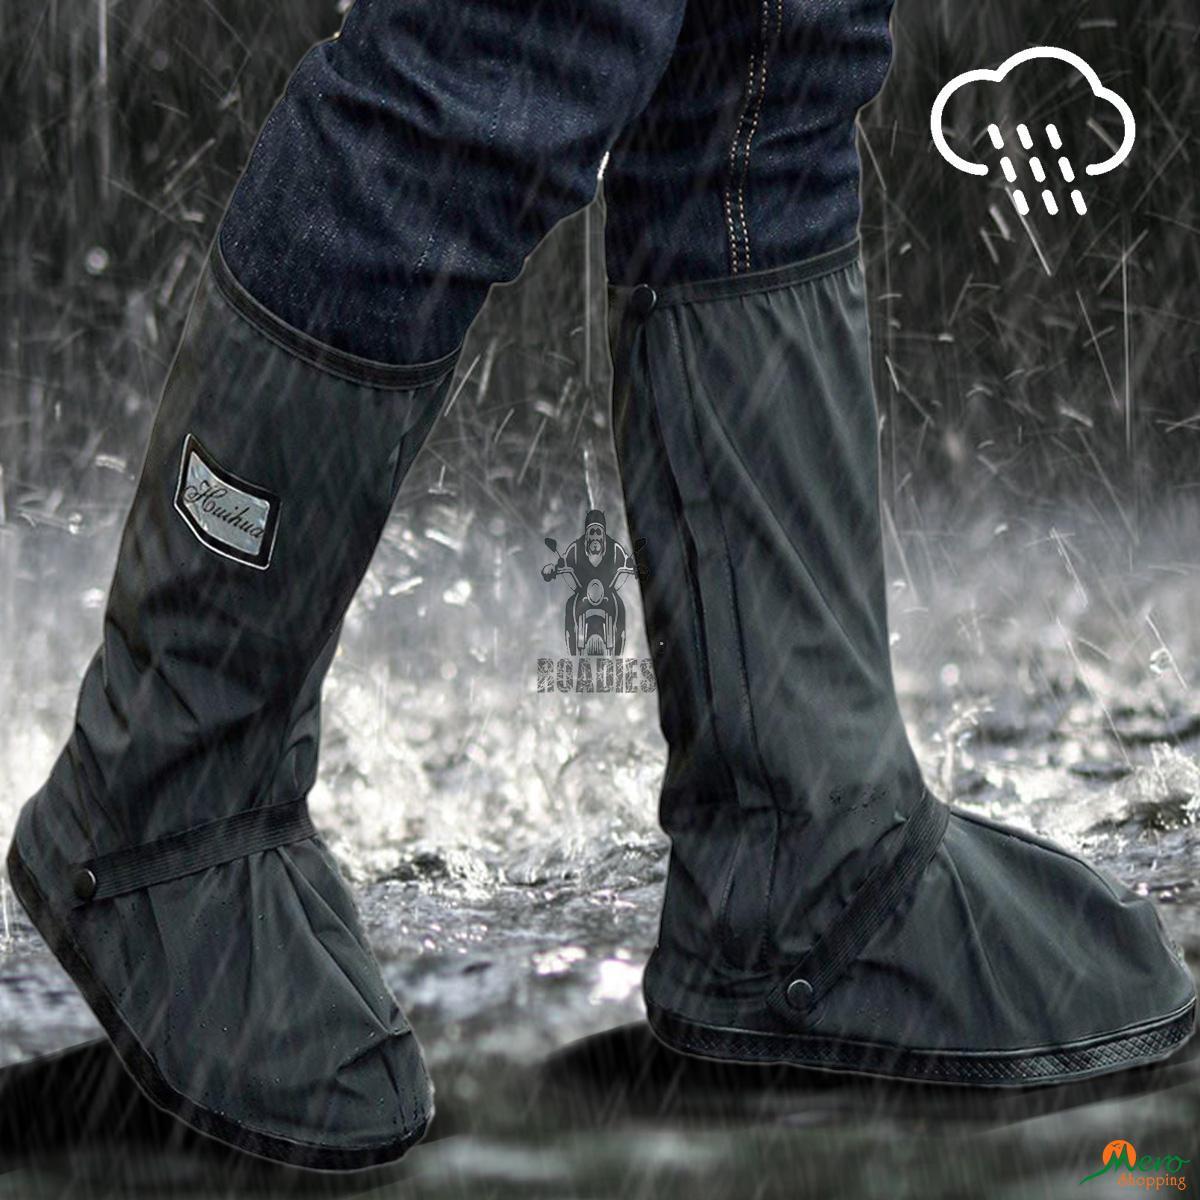 WS Waterproof Shoes Cover with Reflector Rain Snow Boots Black Reusable Covers Gear for Motorcycle Fishing-1 Pair 